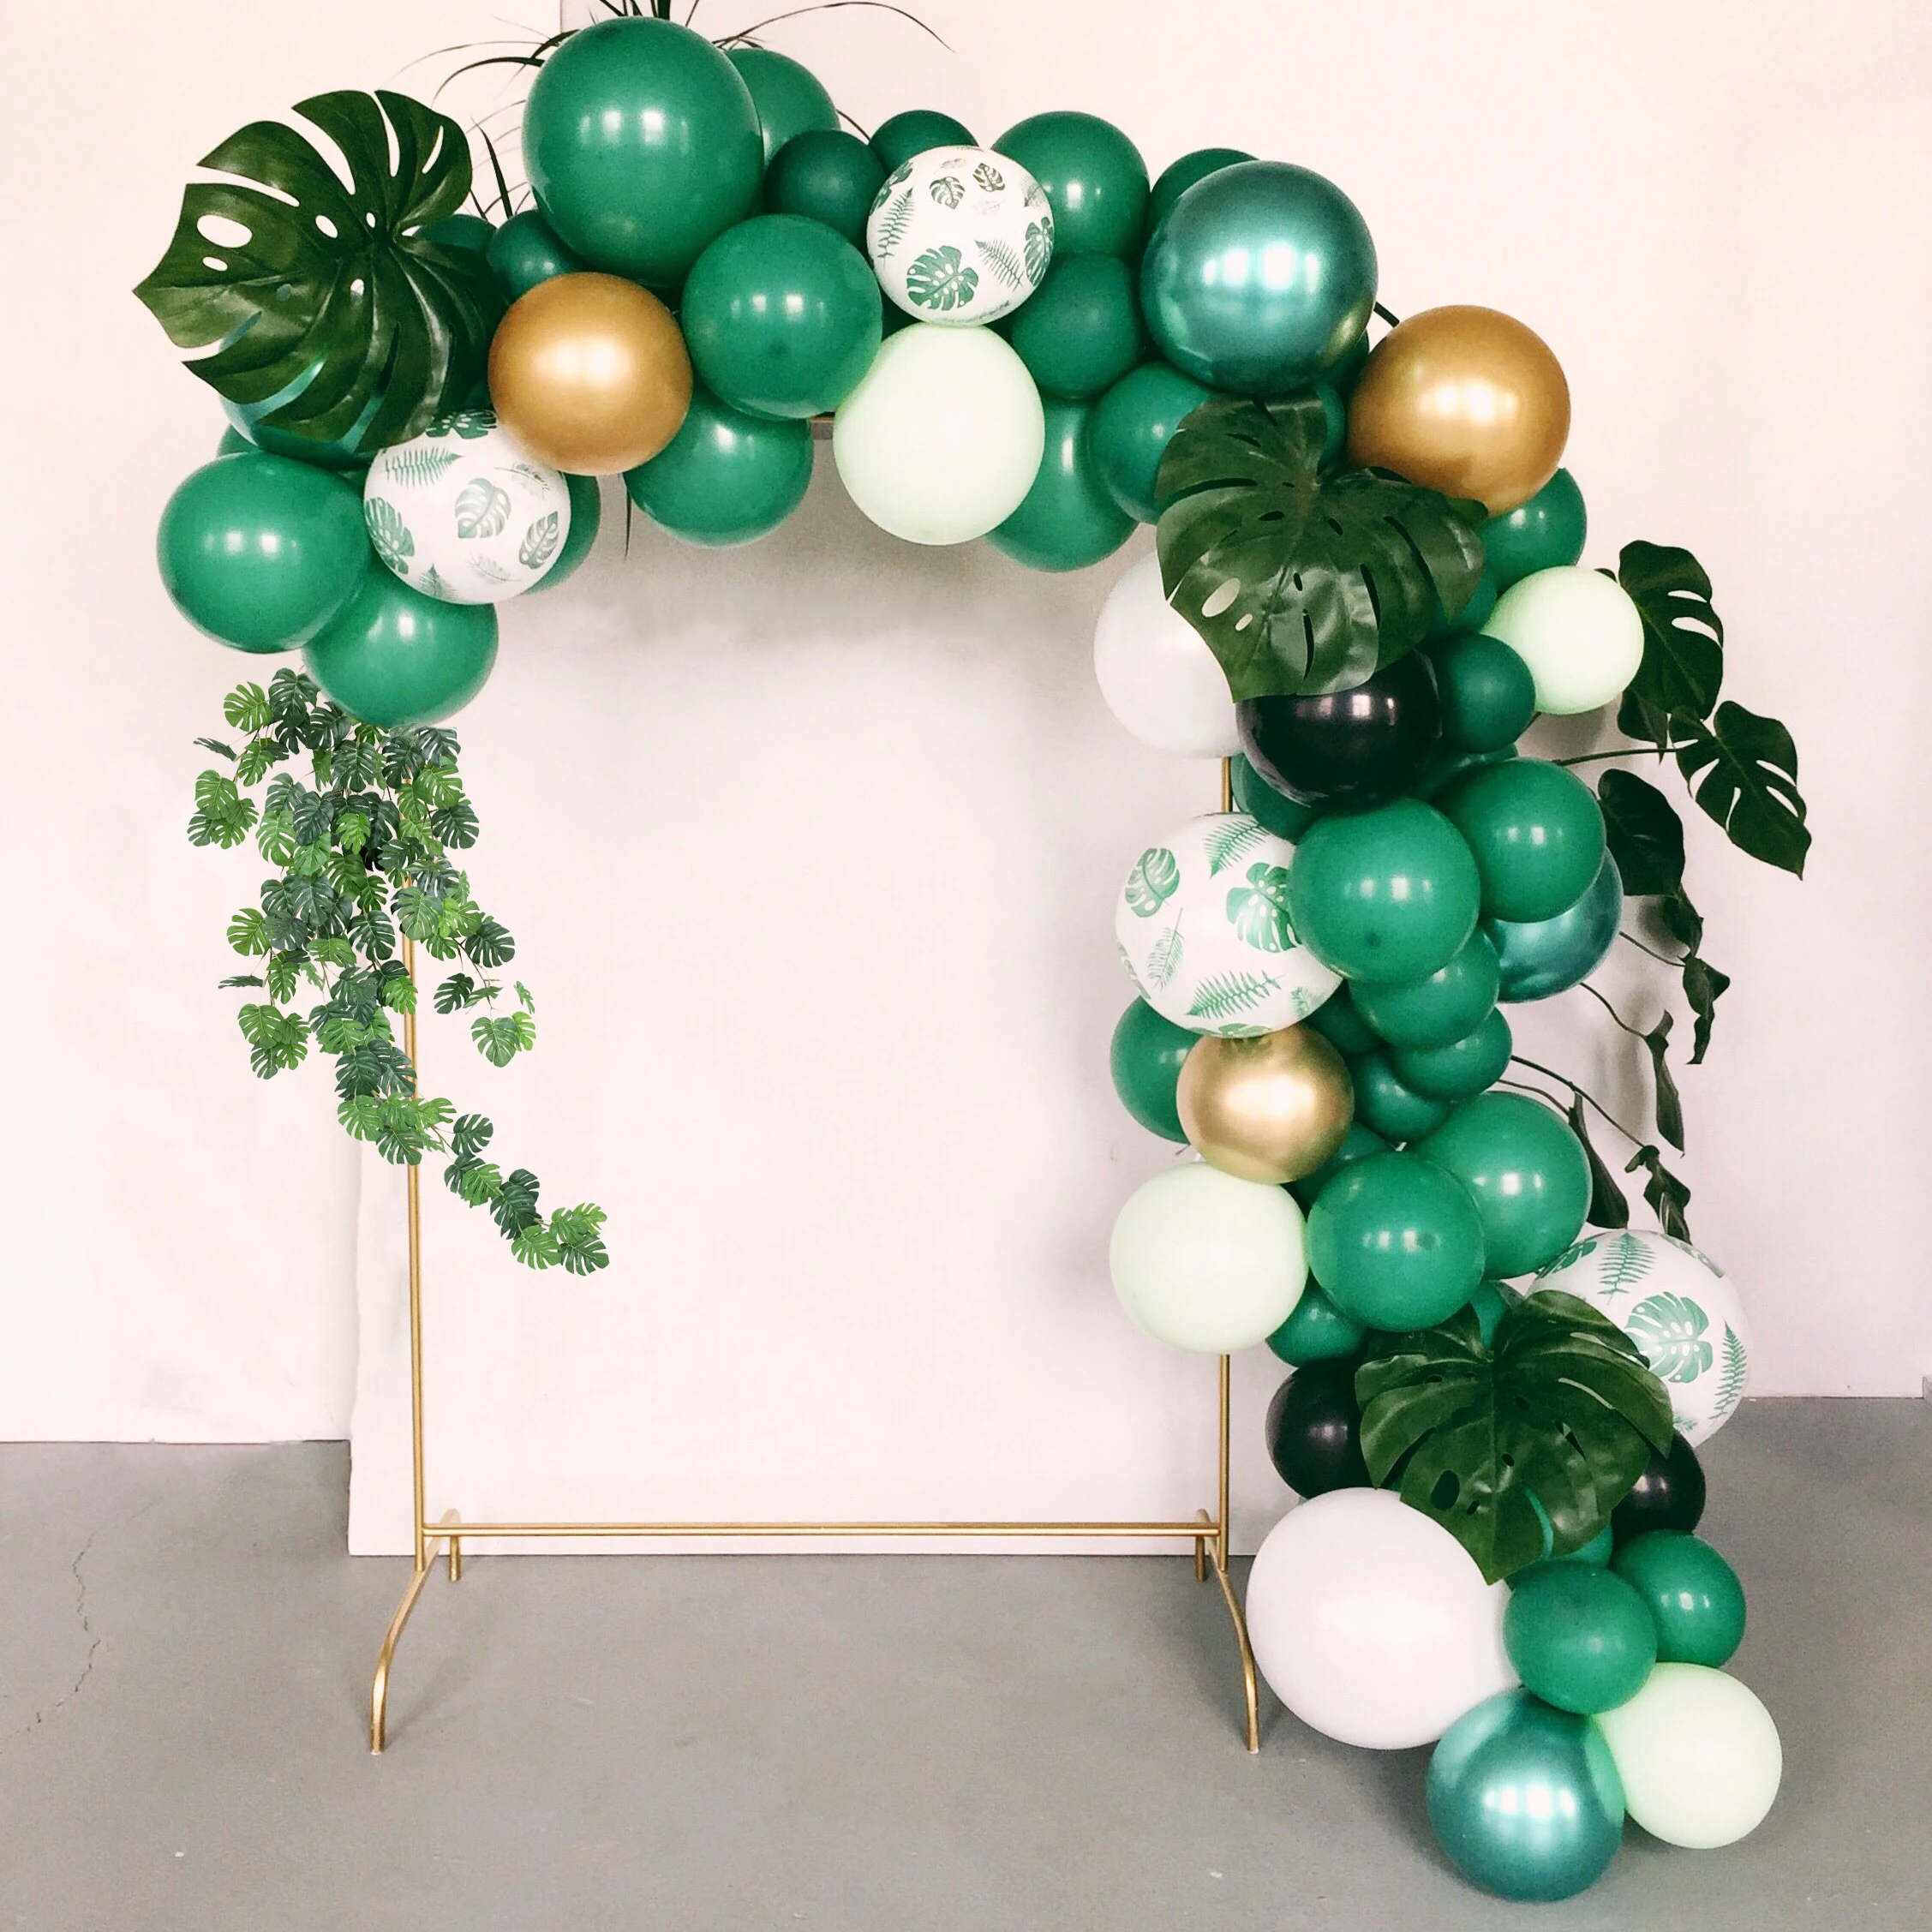 PATIMATE Dark Green Balloons Tropical Forest Birthday Party Decoration Palm Leaf Balloon For Children Jungle Safari Party Decor